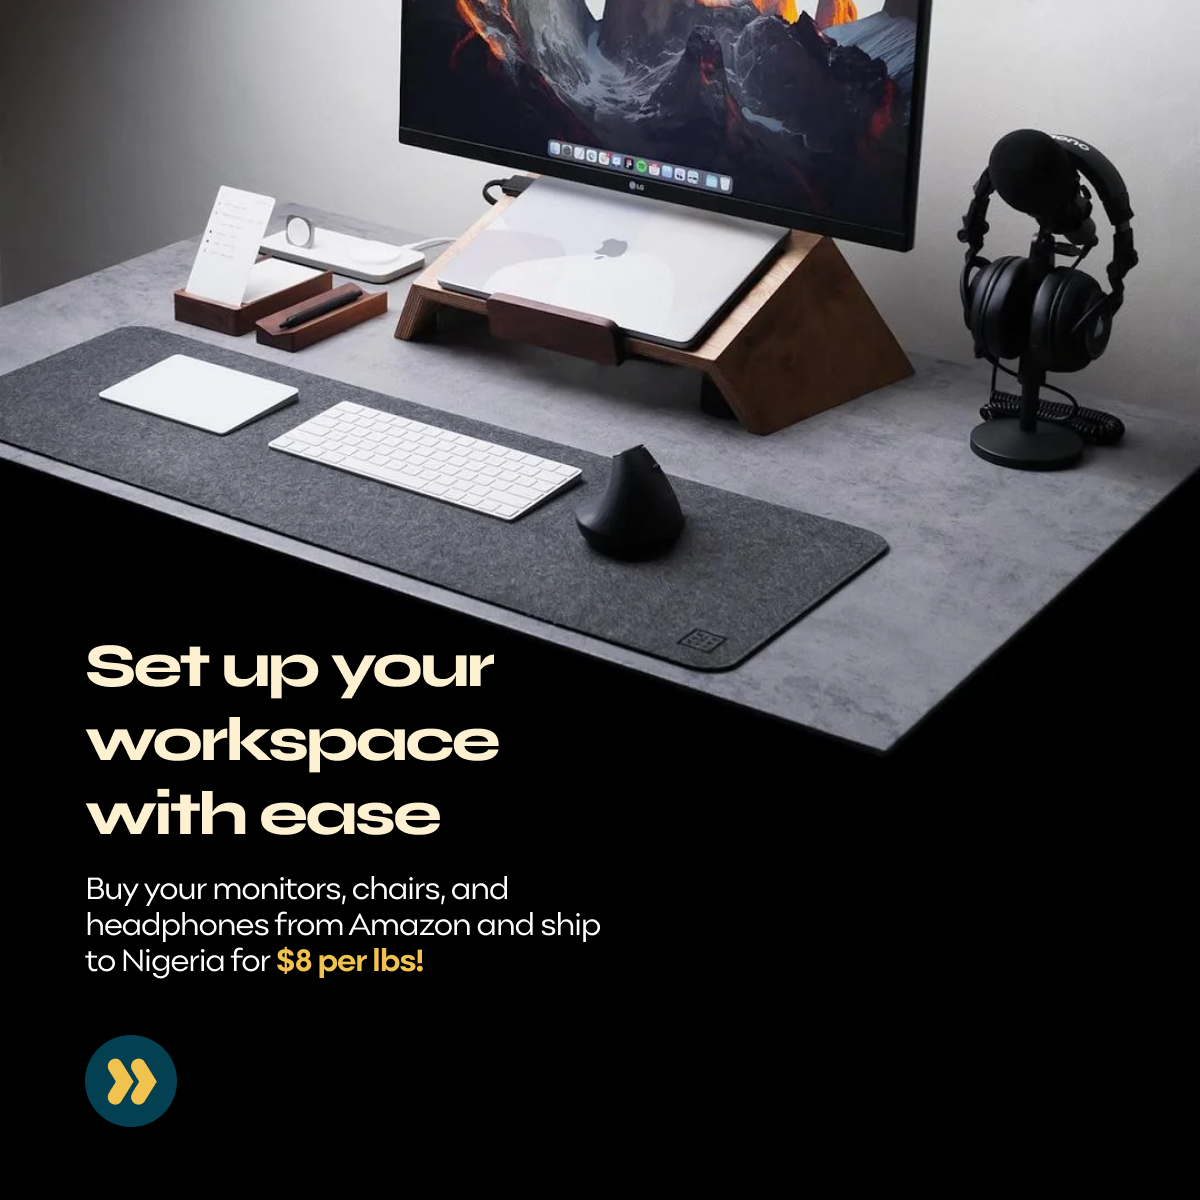 Set up your workspace with ease with Heroshe